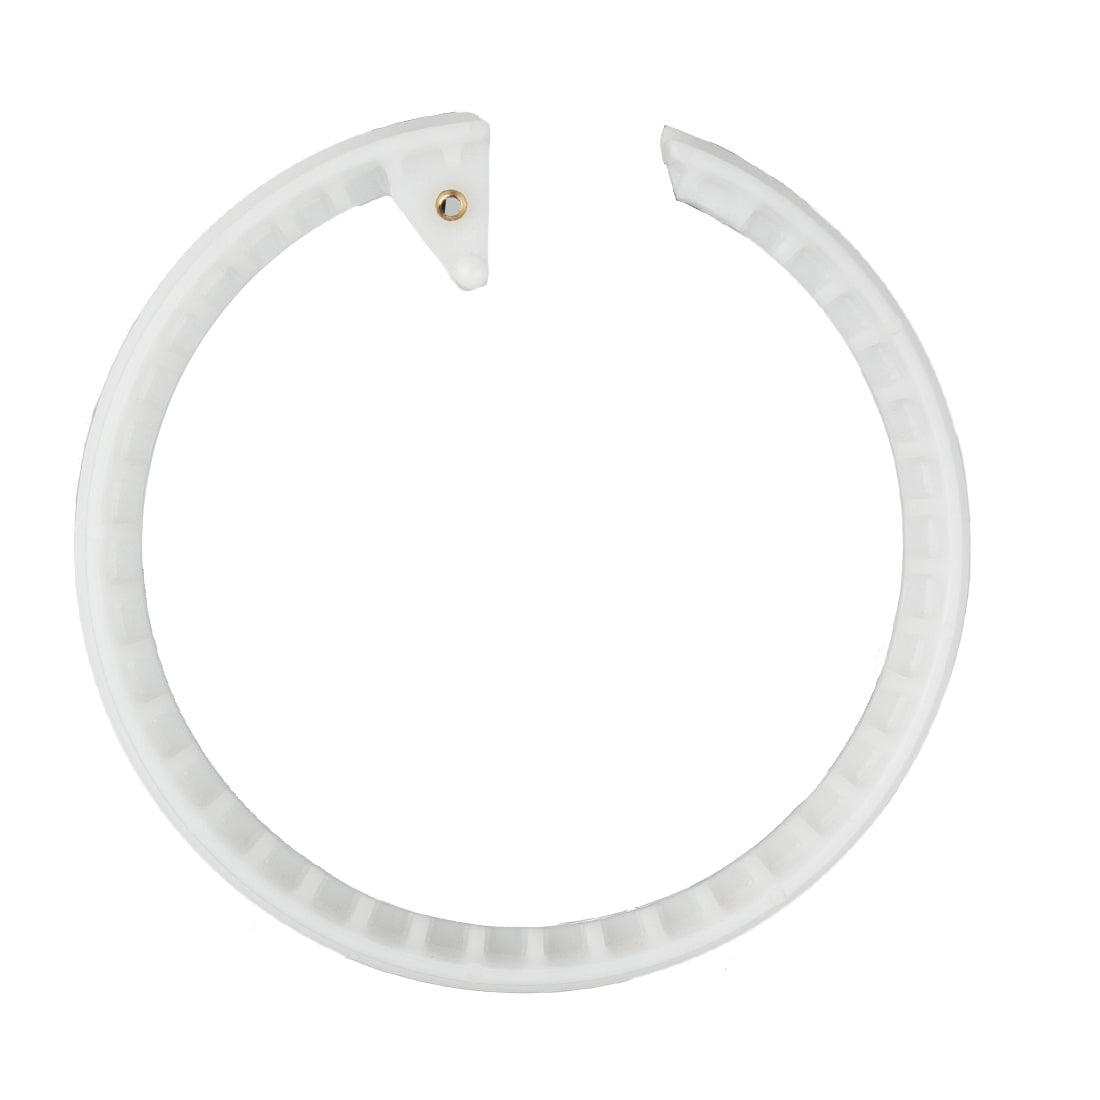 IPC Eagle Snap Ring - Top View